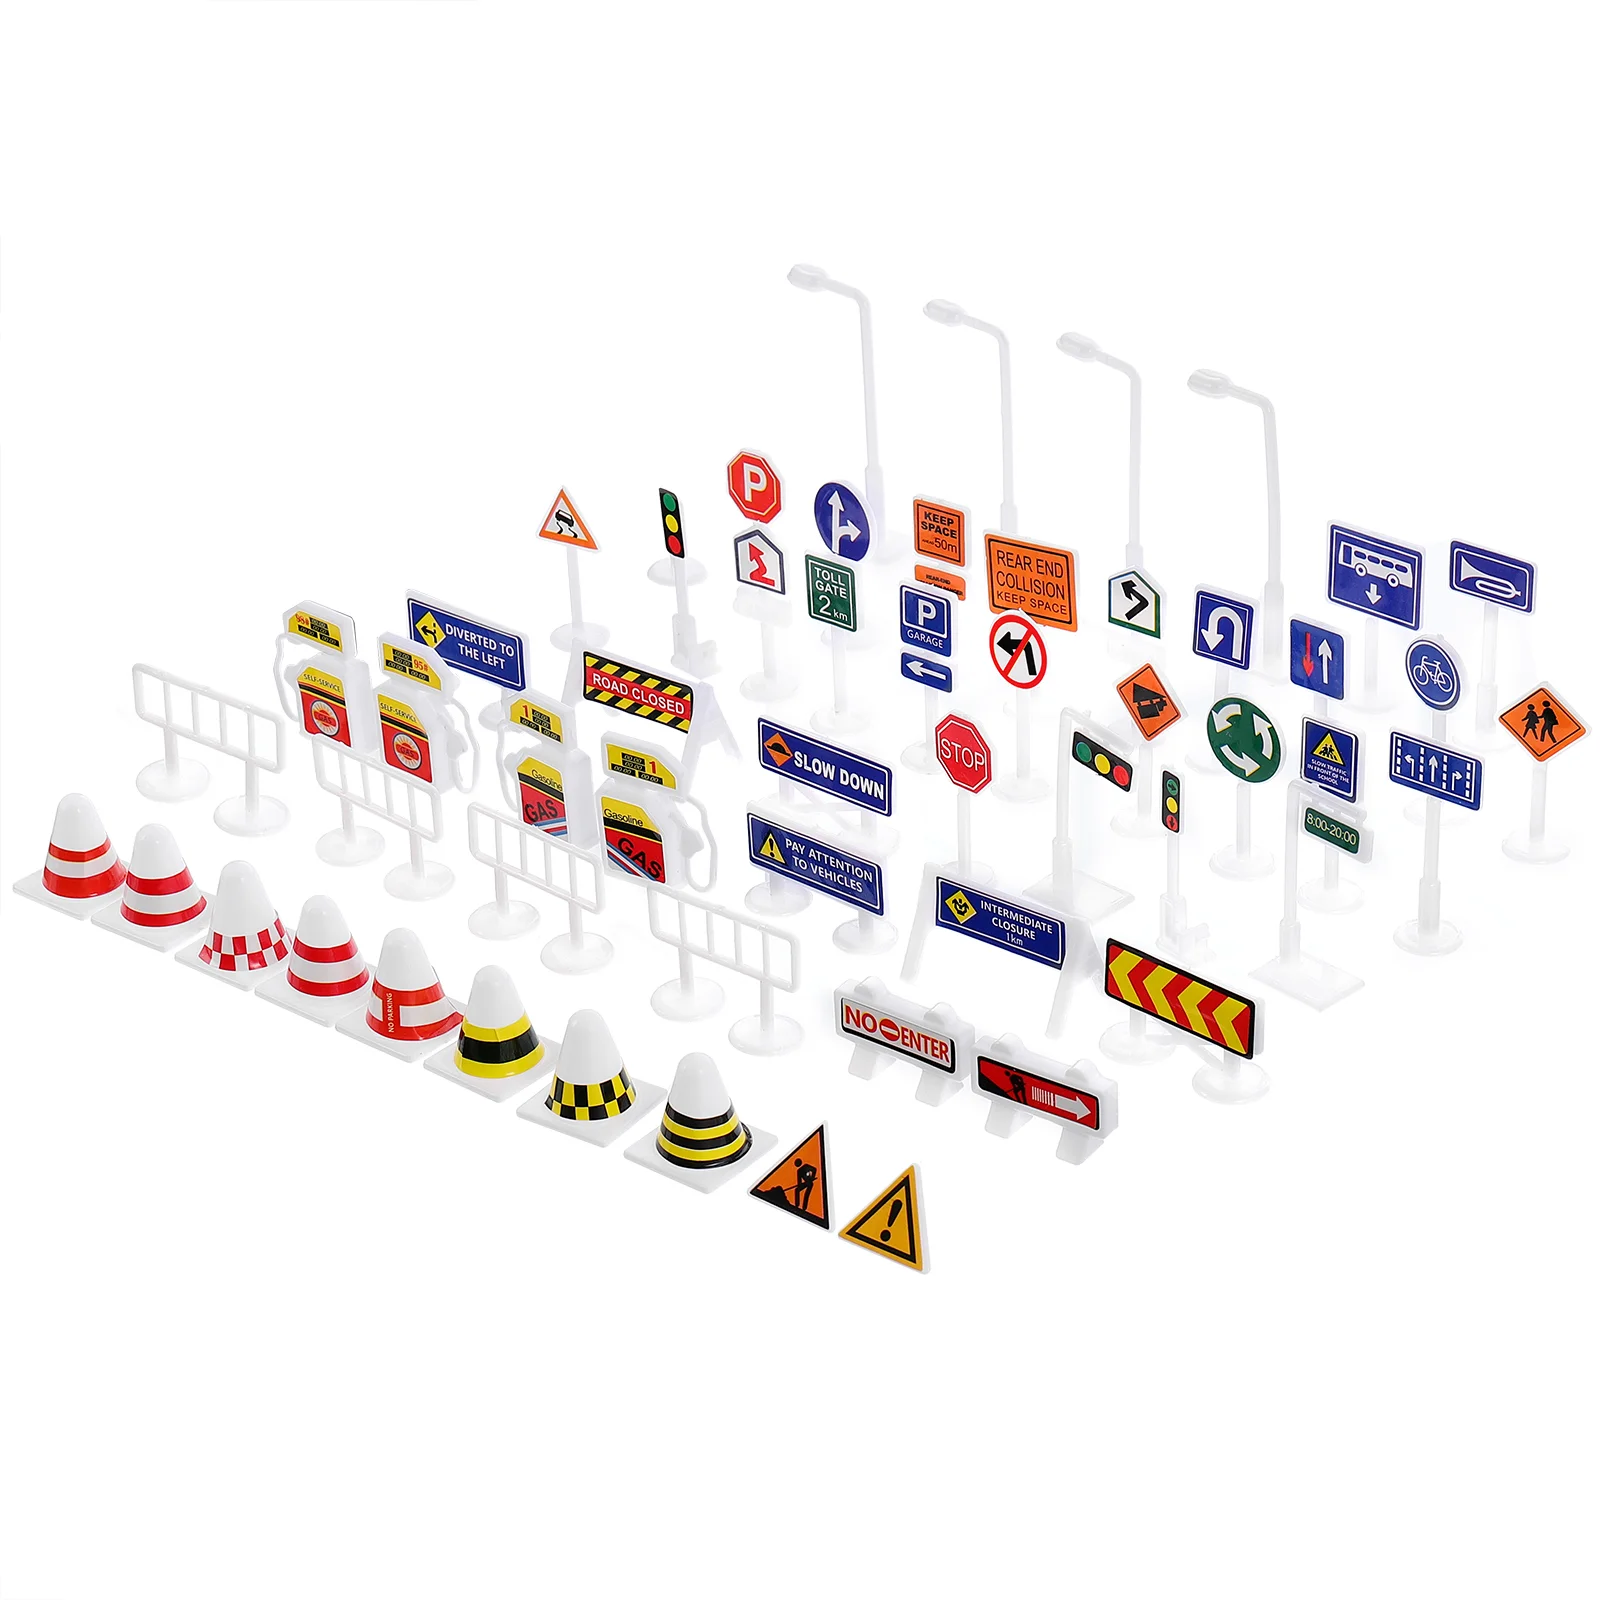 

56 Pcs Barricade Toys Simulation Traffic Sign Train Road DIY Roadblock Safety Street Signs Plastic Cognitive Games Child